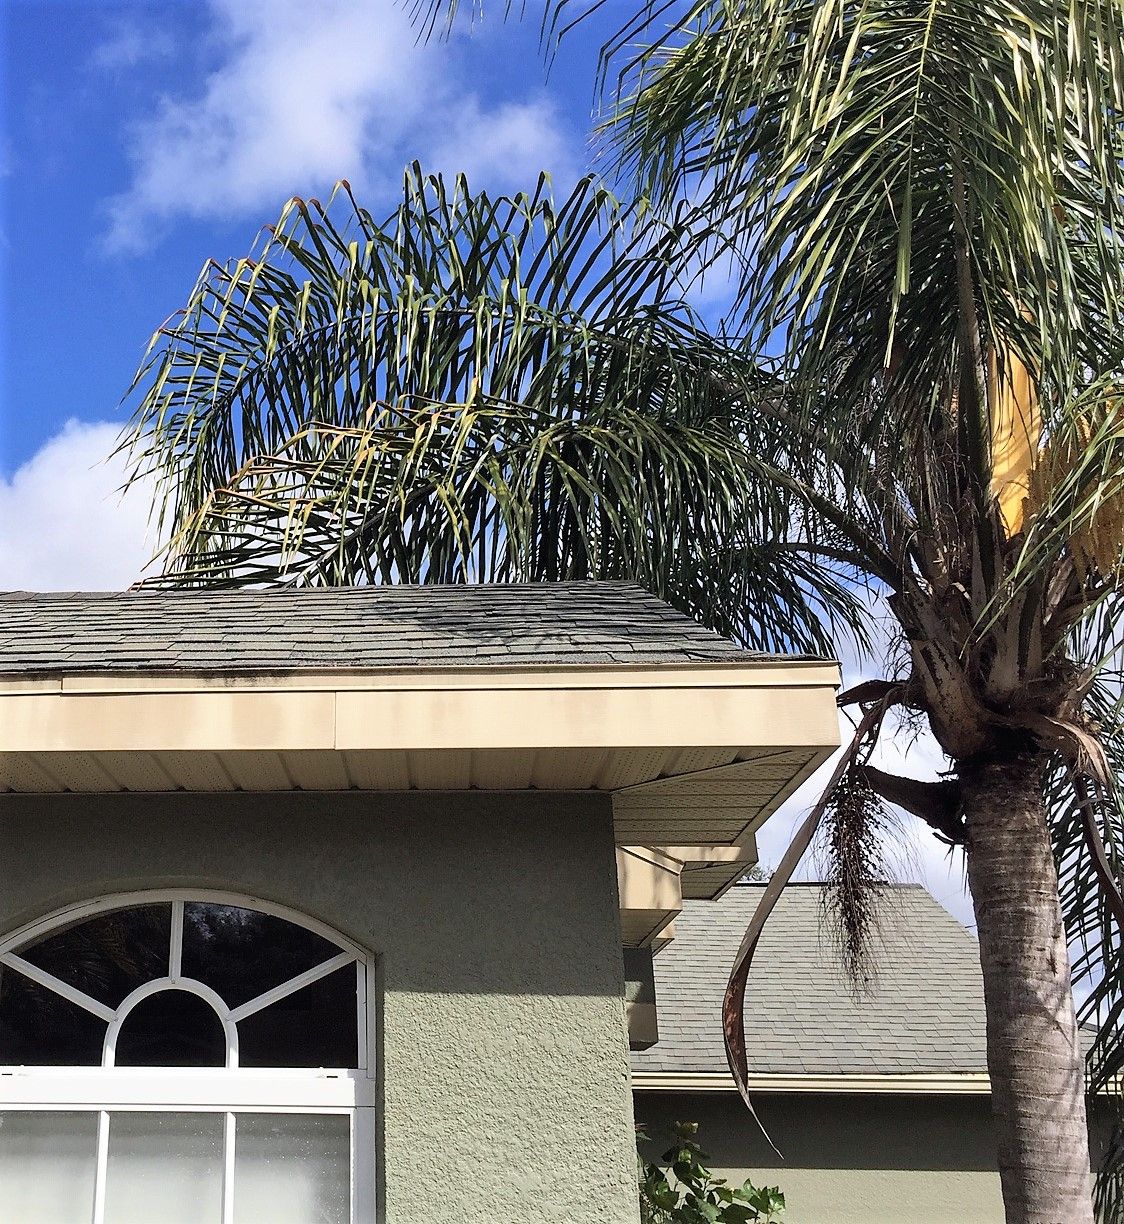 Palm leaves should be removed if hanging over a roof.